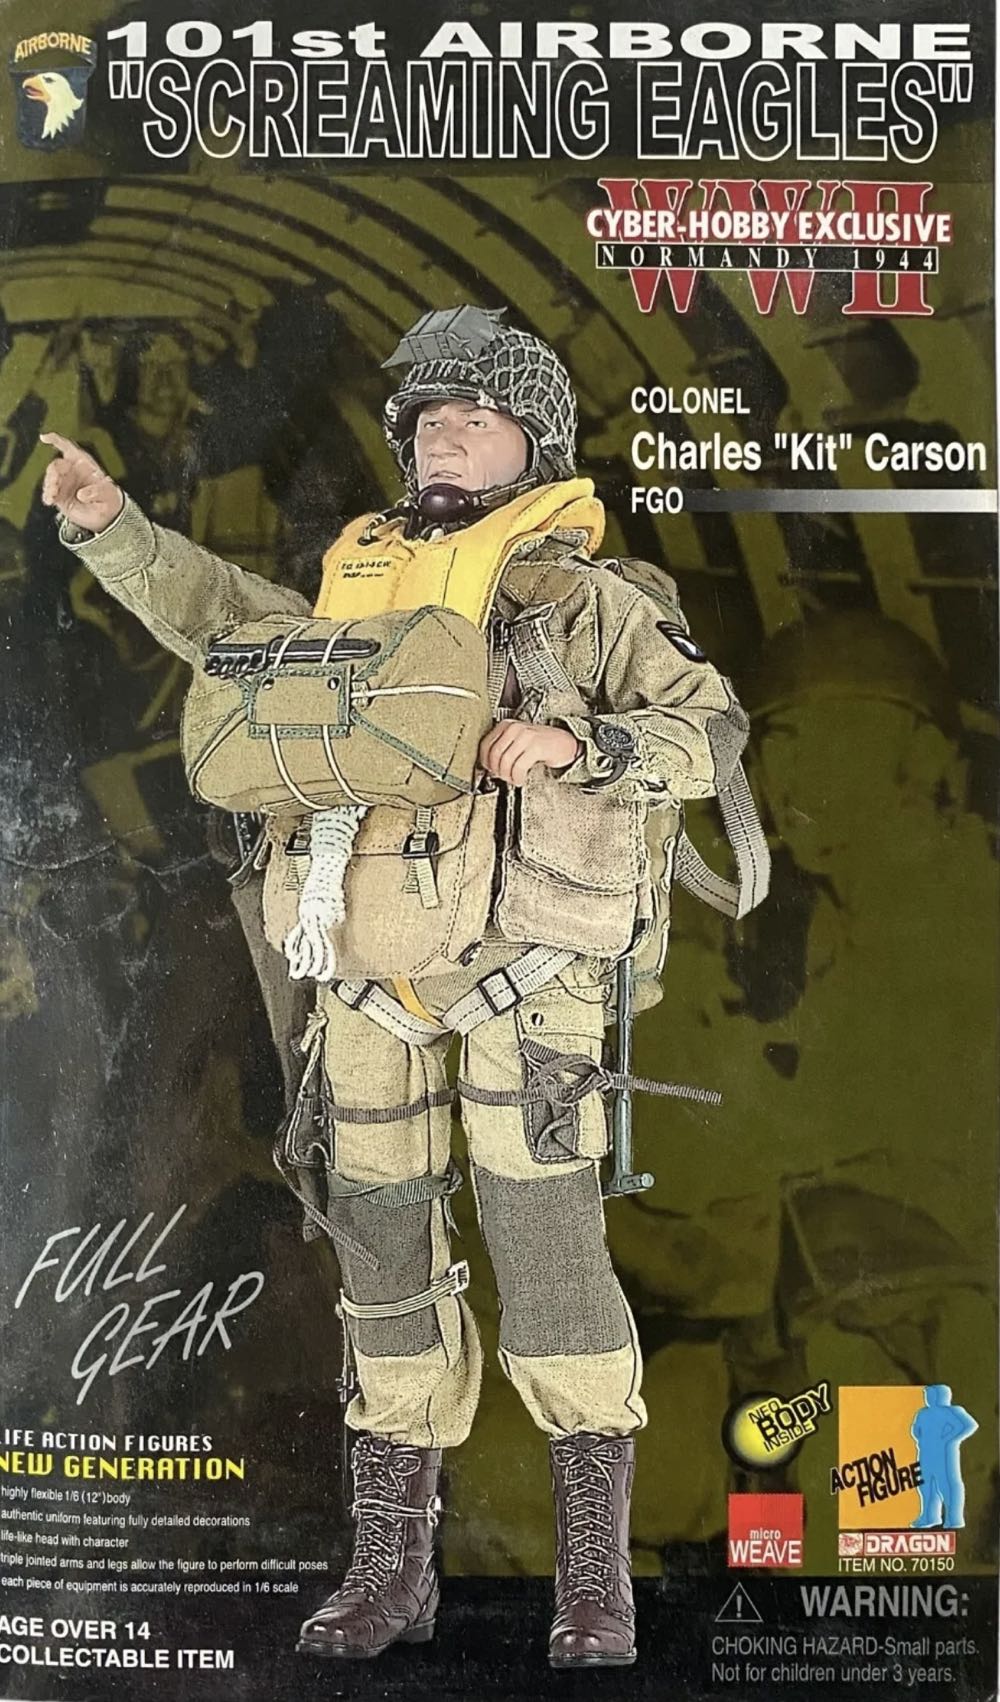 Cyber-Hobby Exclusive - WWII 101st Airborne - Dragon Models Ltd. (WWII Normandy 1945) action figure collectible - Main Image 1